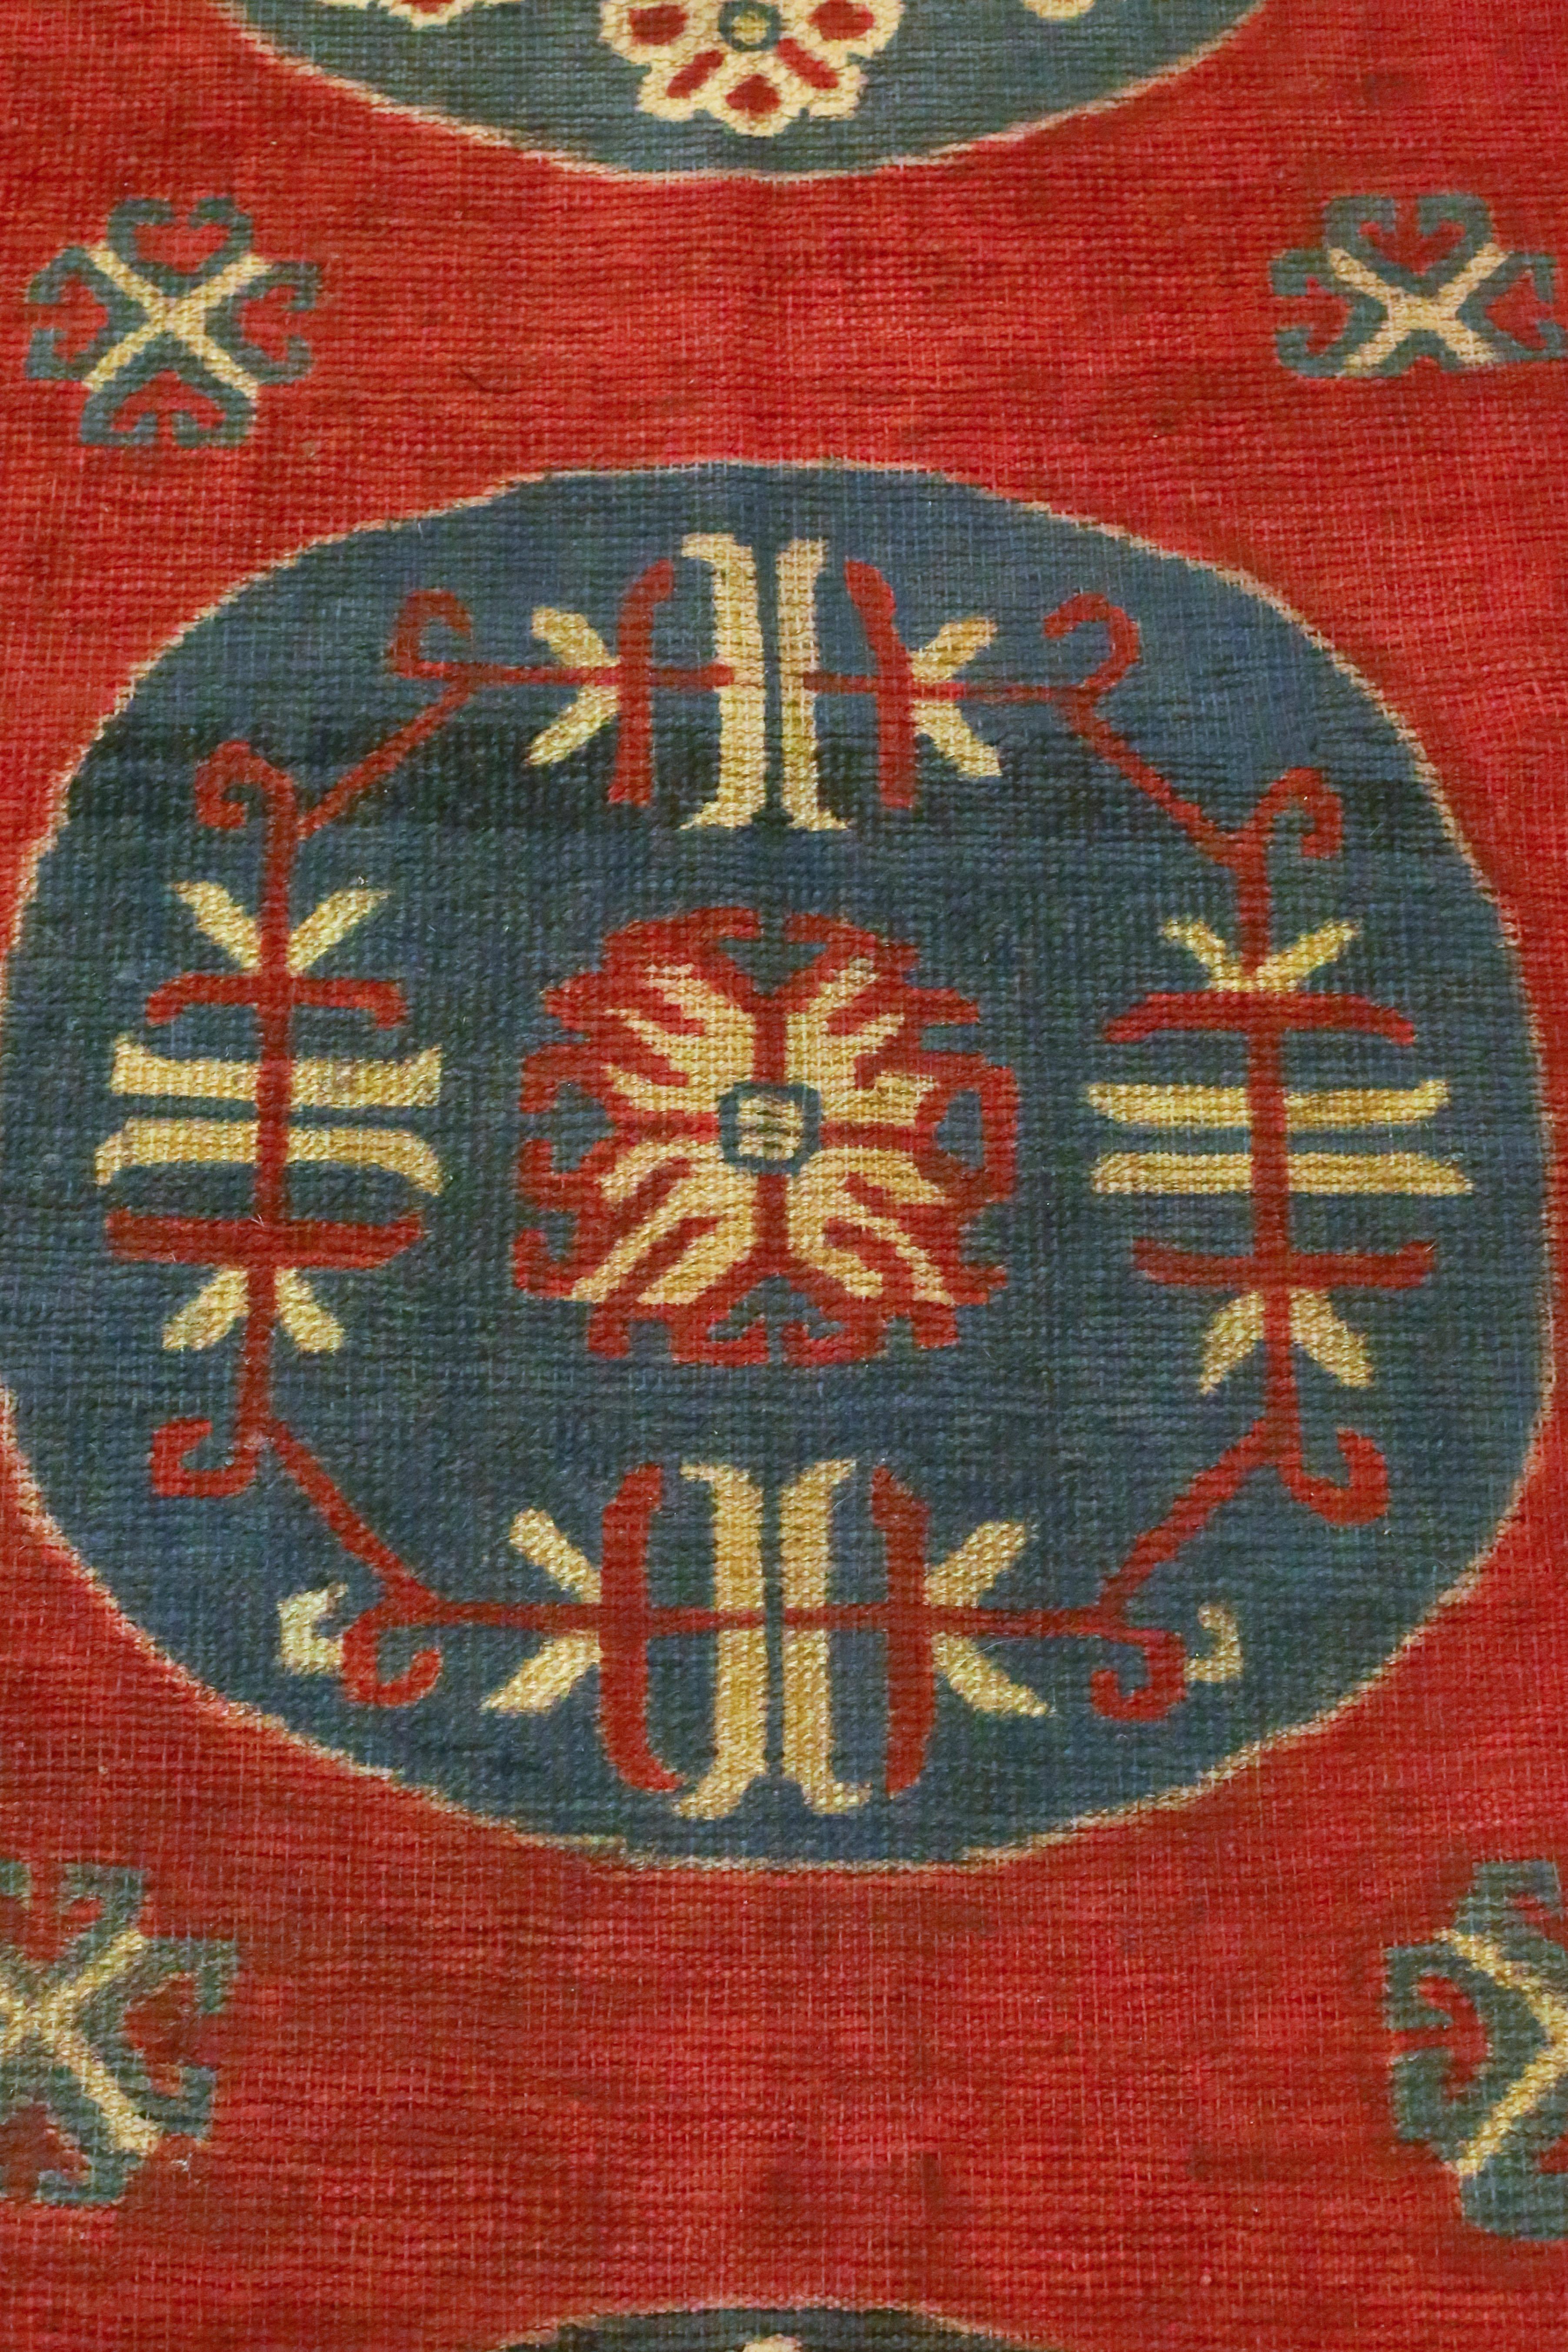 This is an antique Samarkand rug from East Turkistan, circa 1900s. Three circular medallions float on a red field that is surrounded by an infinity border and another outer border. Tones of muted reds, ivories, navys and greys, convey a feeling of